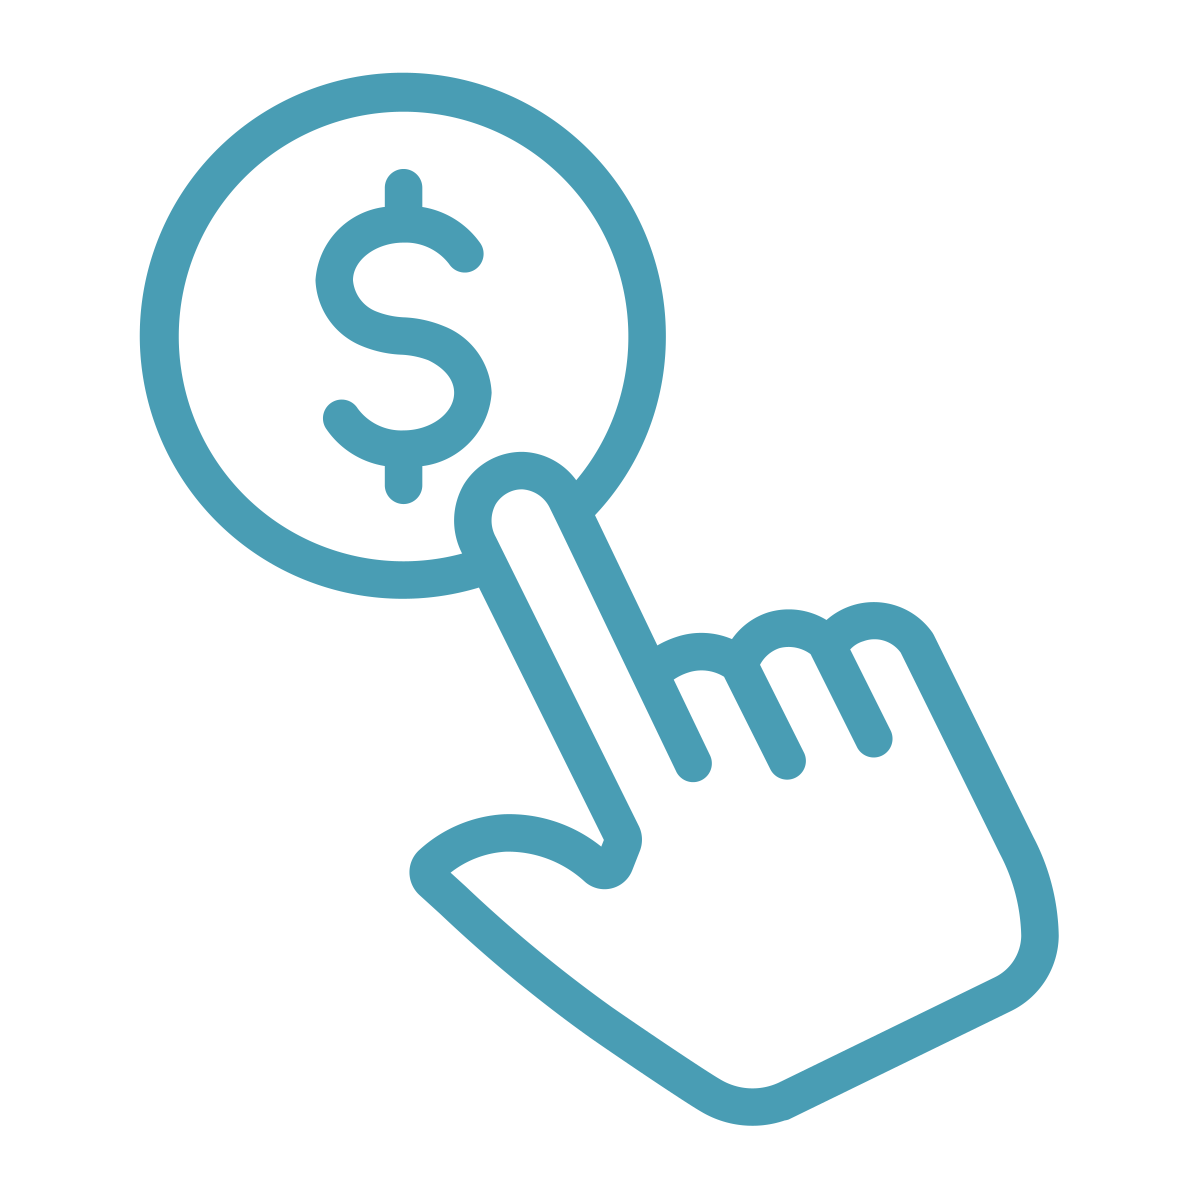 Make giving easier by lowering barriers for your attendees and members with optional online giving. Icon by NounProject.com.